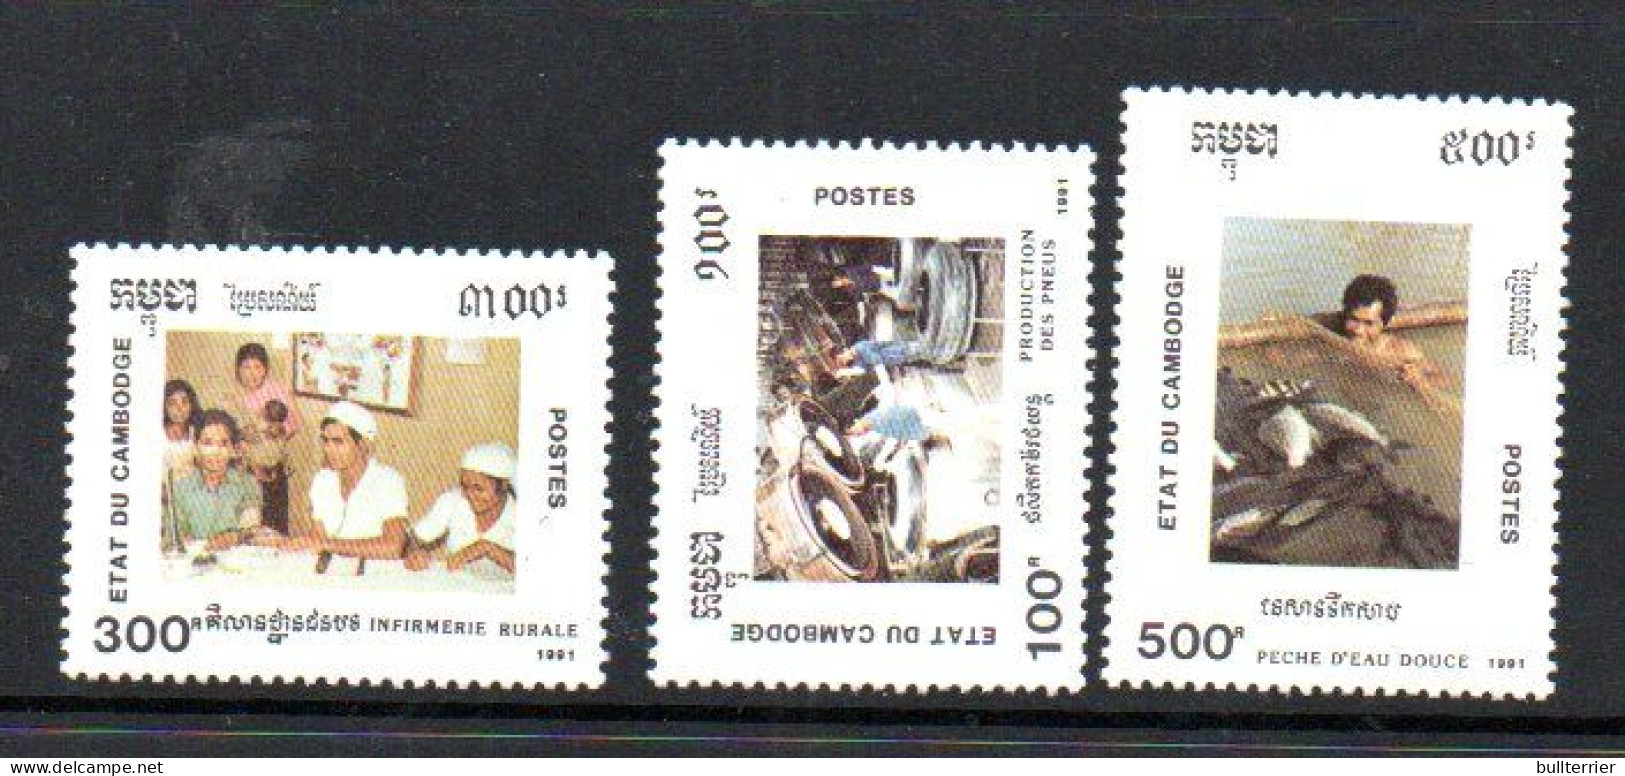 CAMBODIA - 1991  FOOD INDUSTRY  SET OF 3  MINT NEVER HINGED - Cambodge